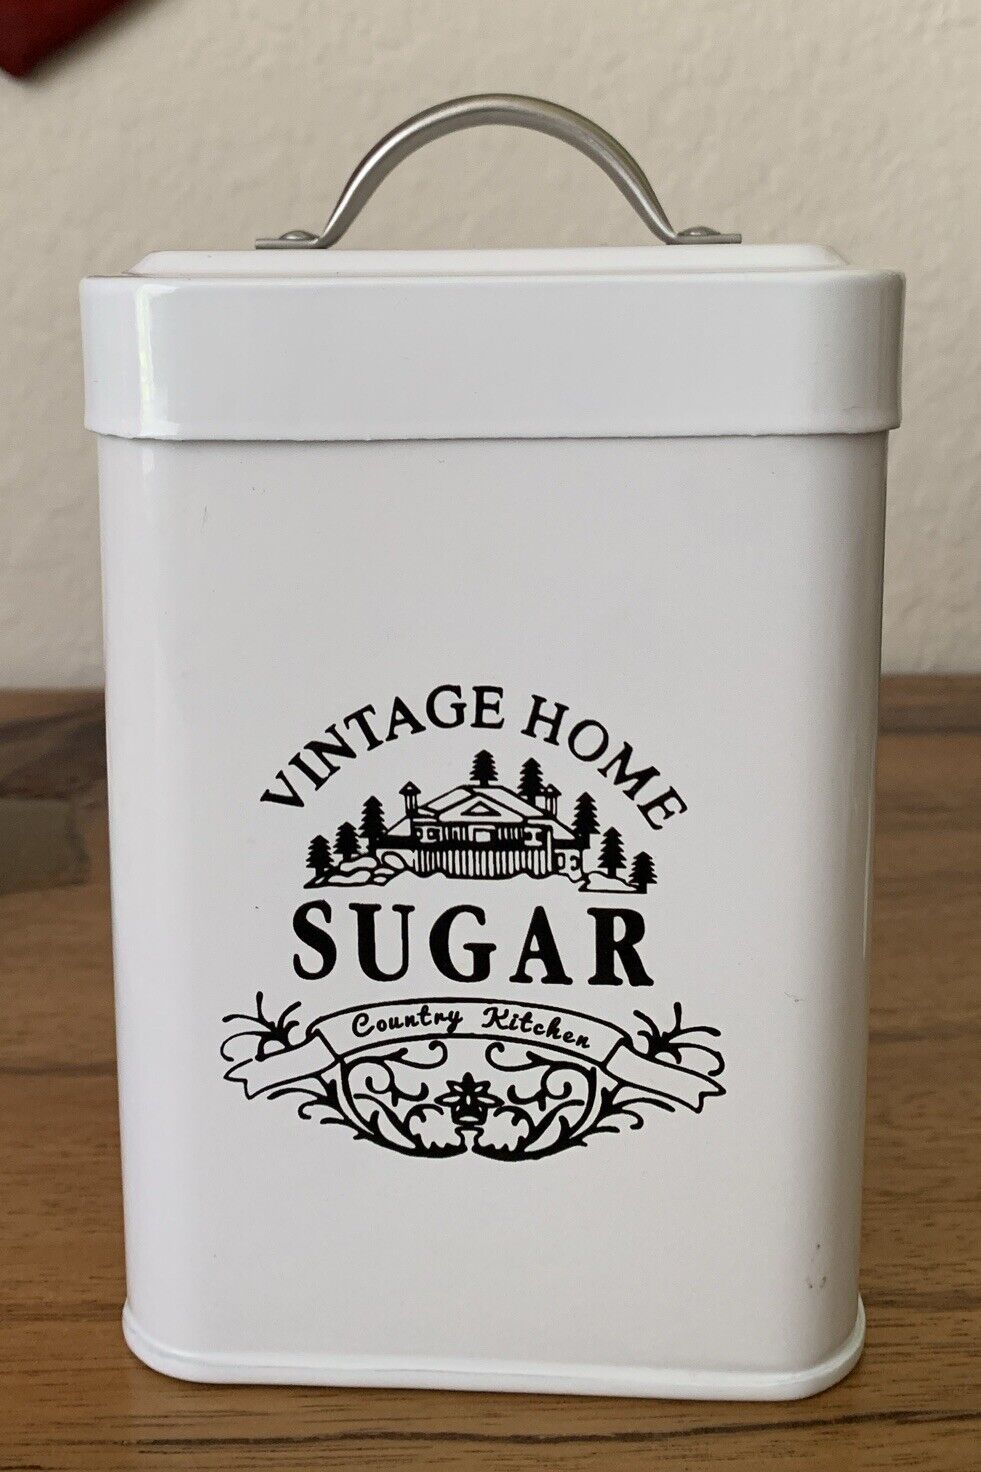 Vintage White Home Canister Sugar Container